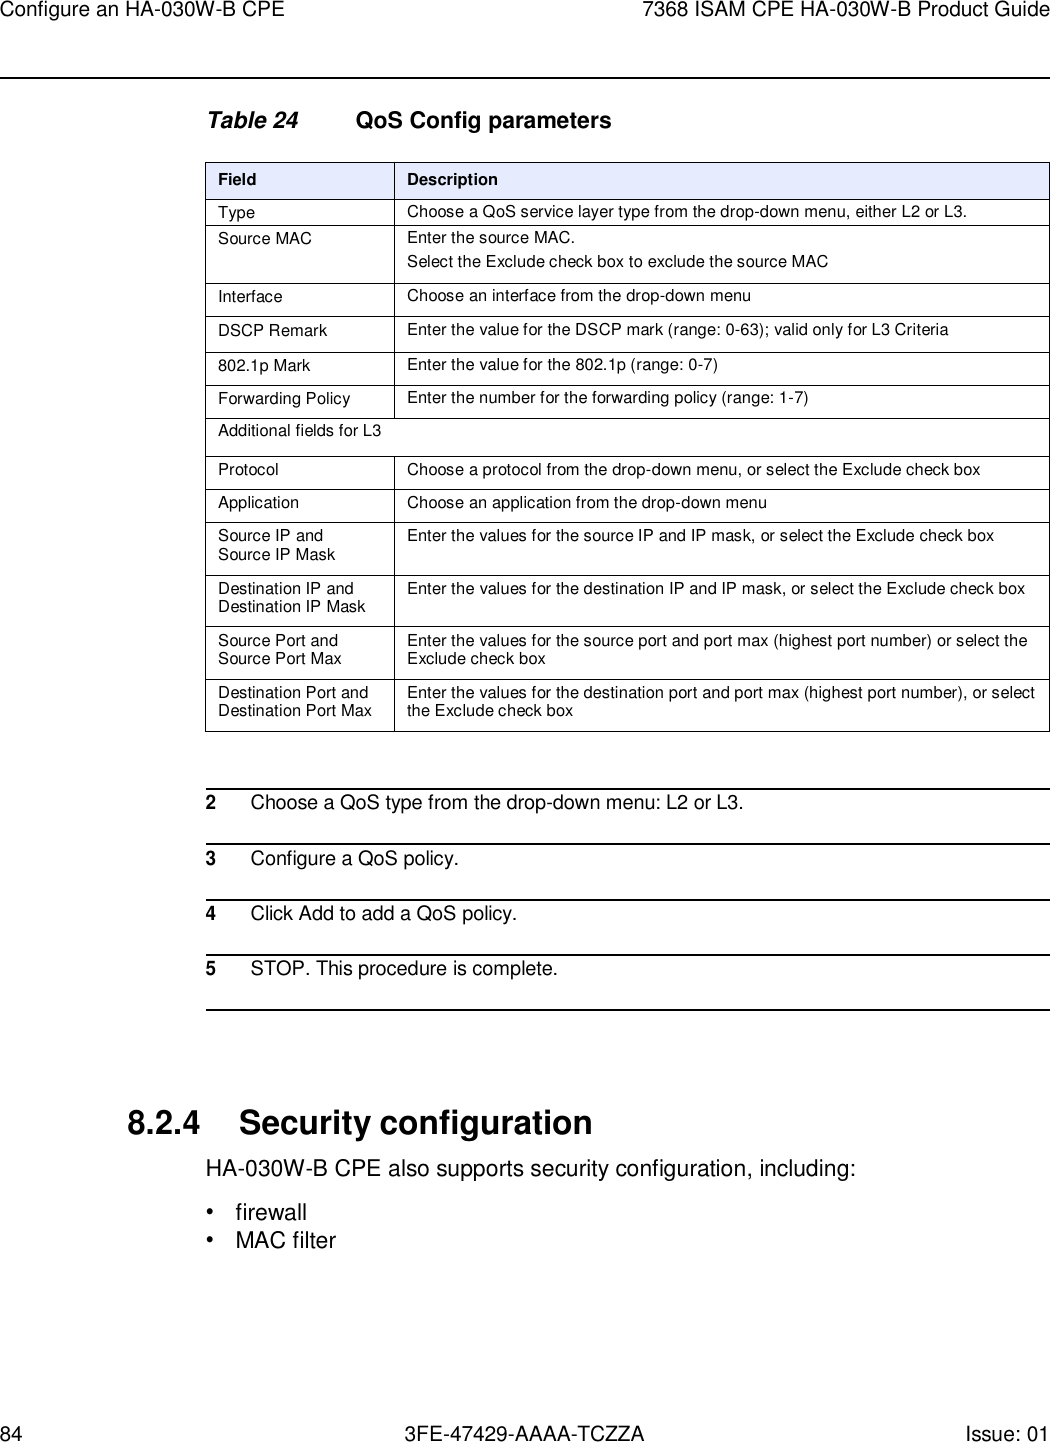 Page 84 of Nokia Bell HA030WB 7368 Intelligent Services Access Manager CPE User Manual 7368 ISAM CPE HA 020W A Product Guide